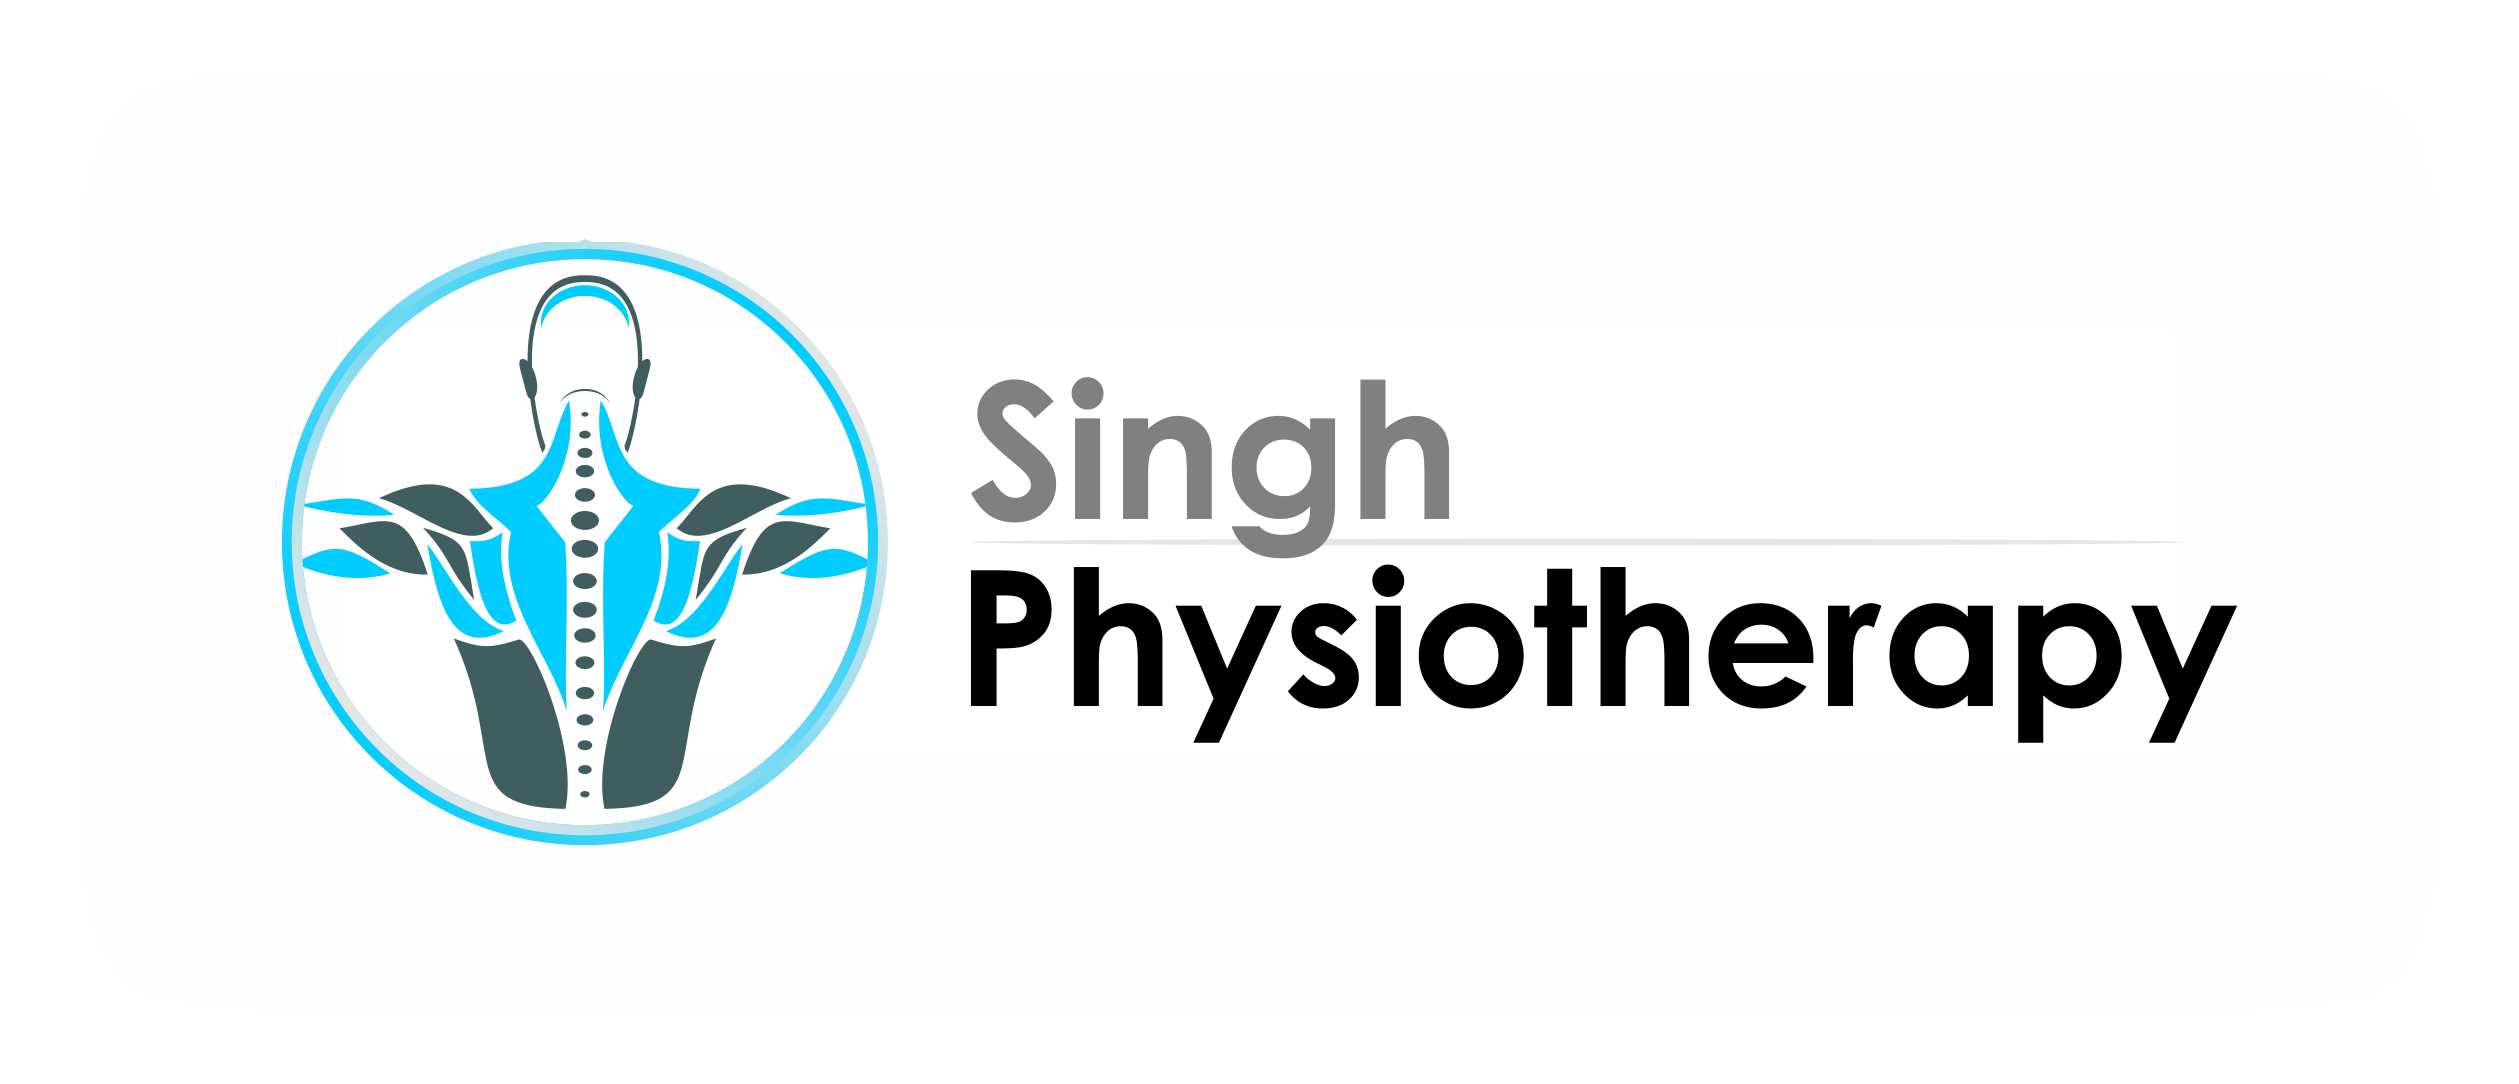 Singh Physiotherapy|Diagnostic centre|Medical Services